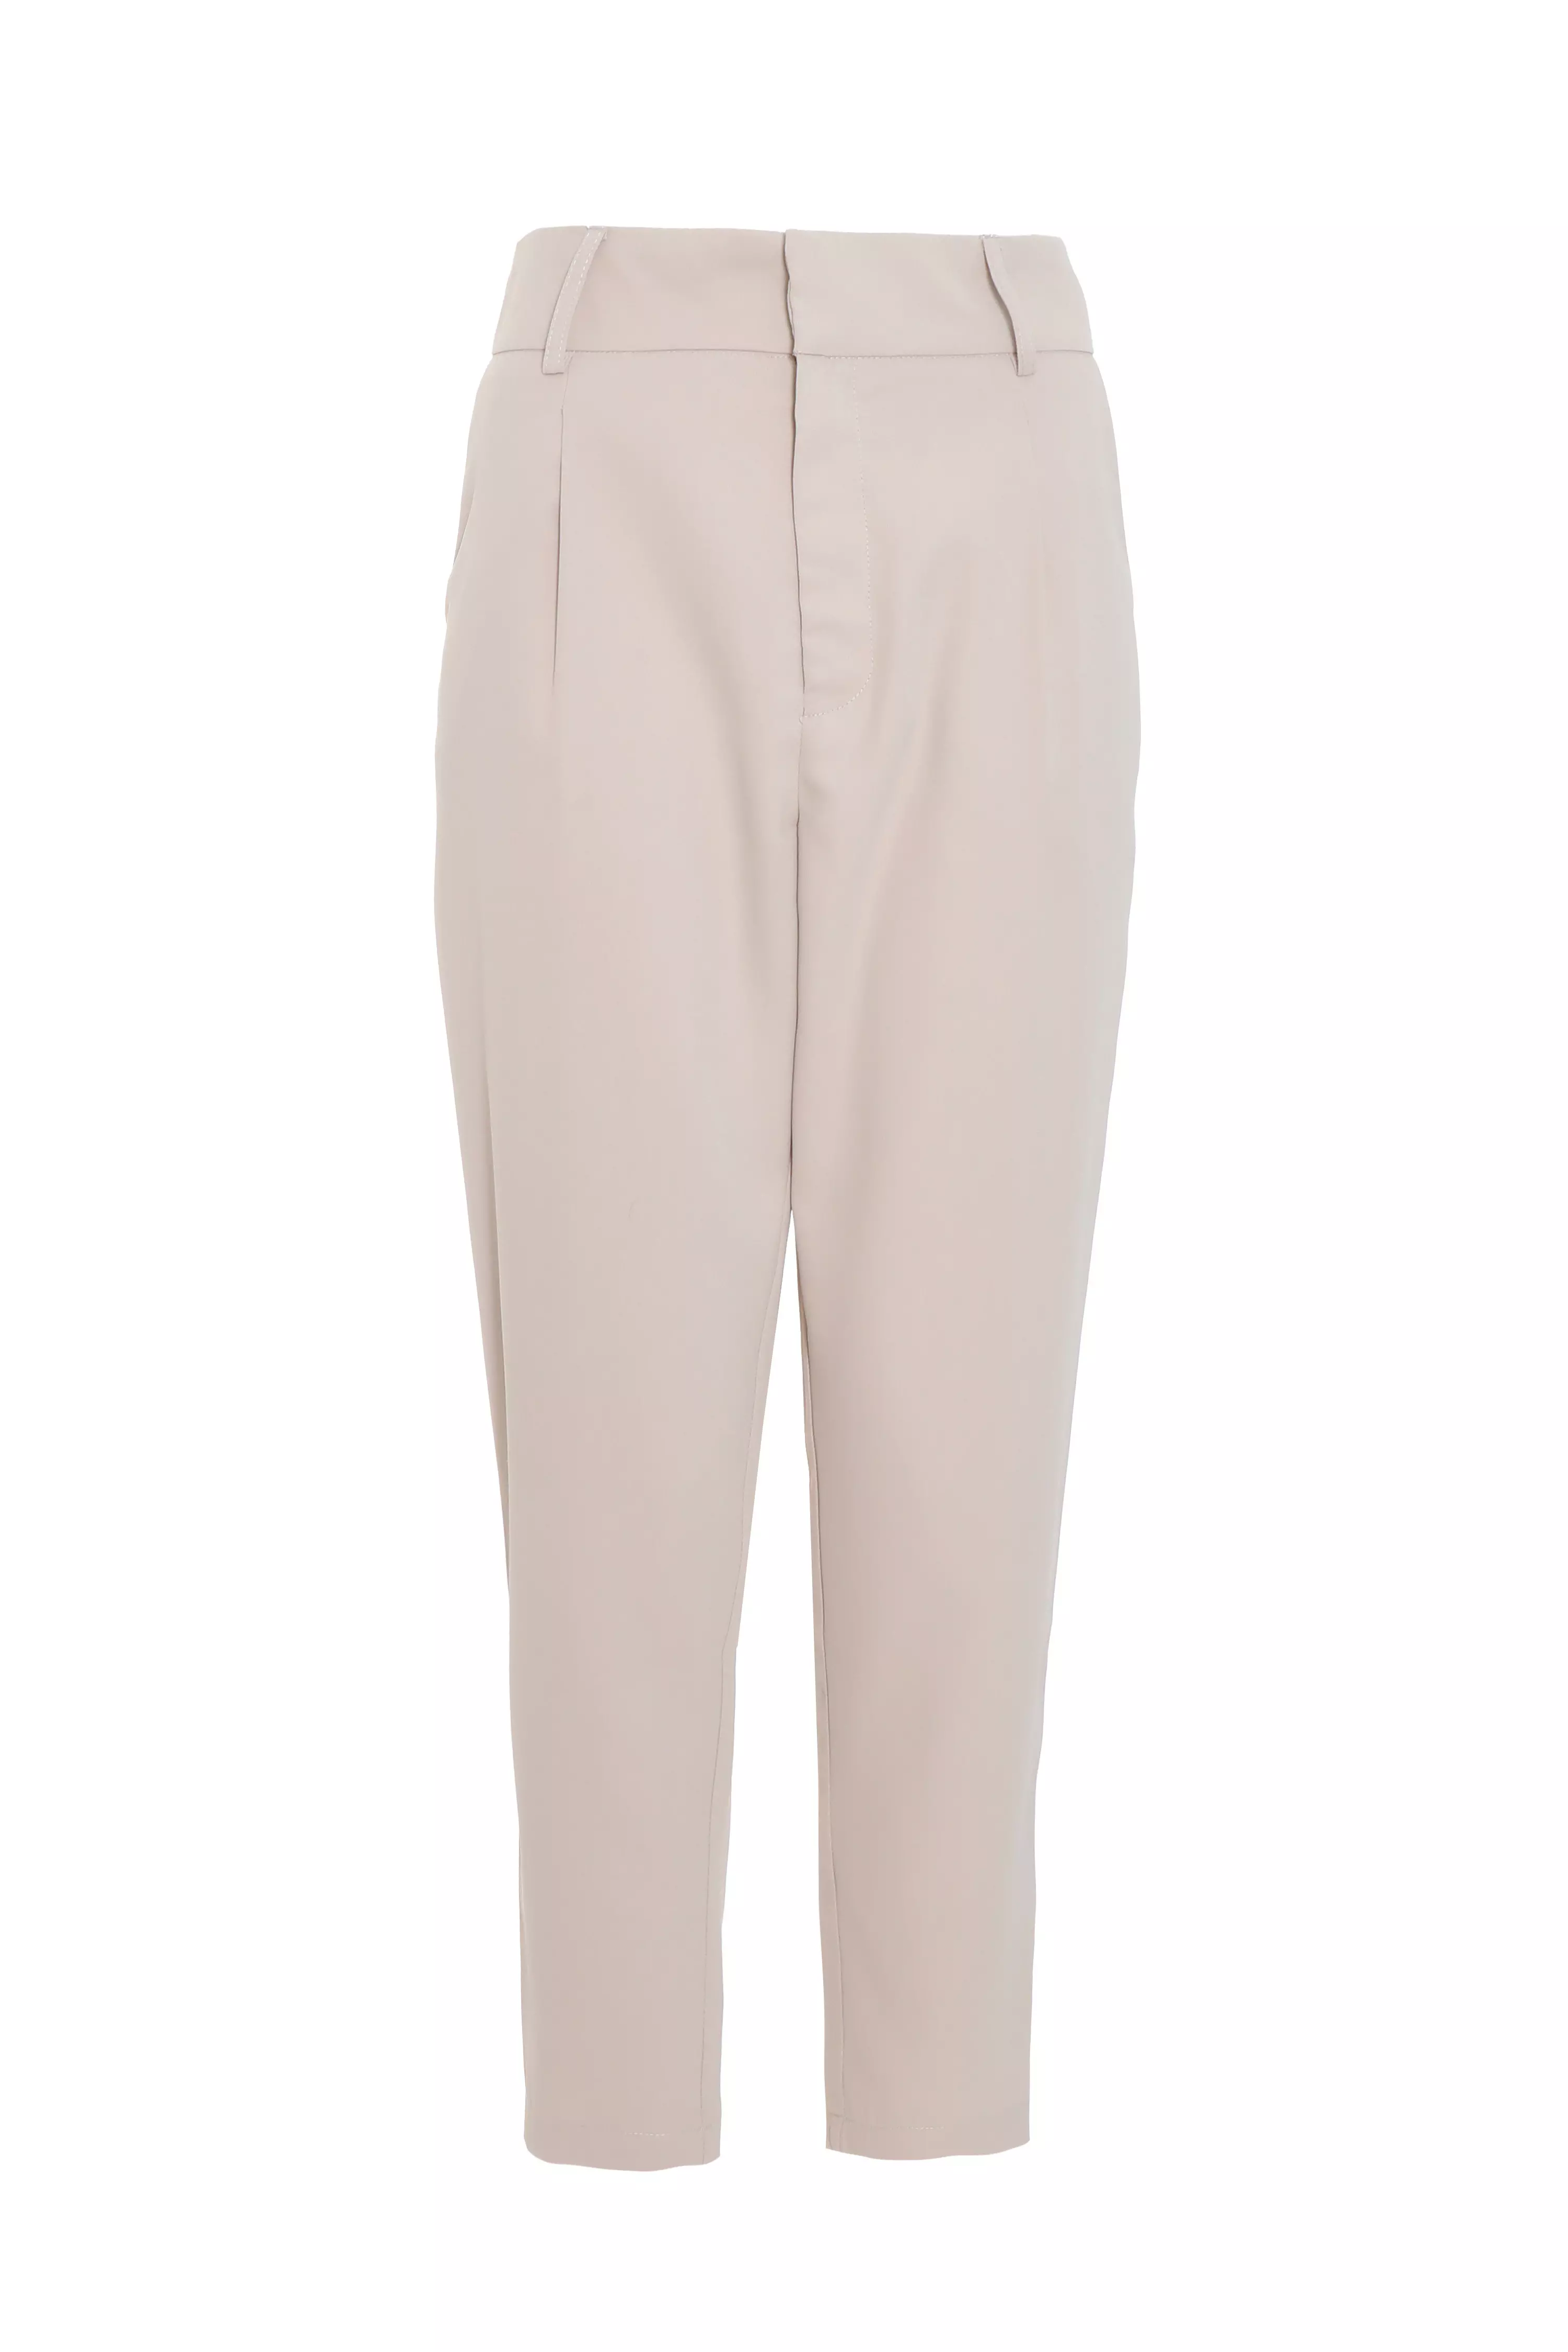 Petite Stone High Waisted Tapered Trousers - QUIZ Clothing